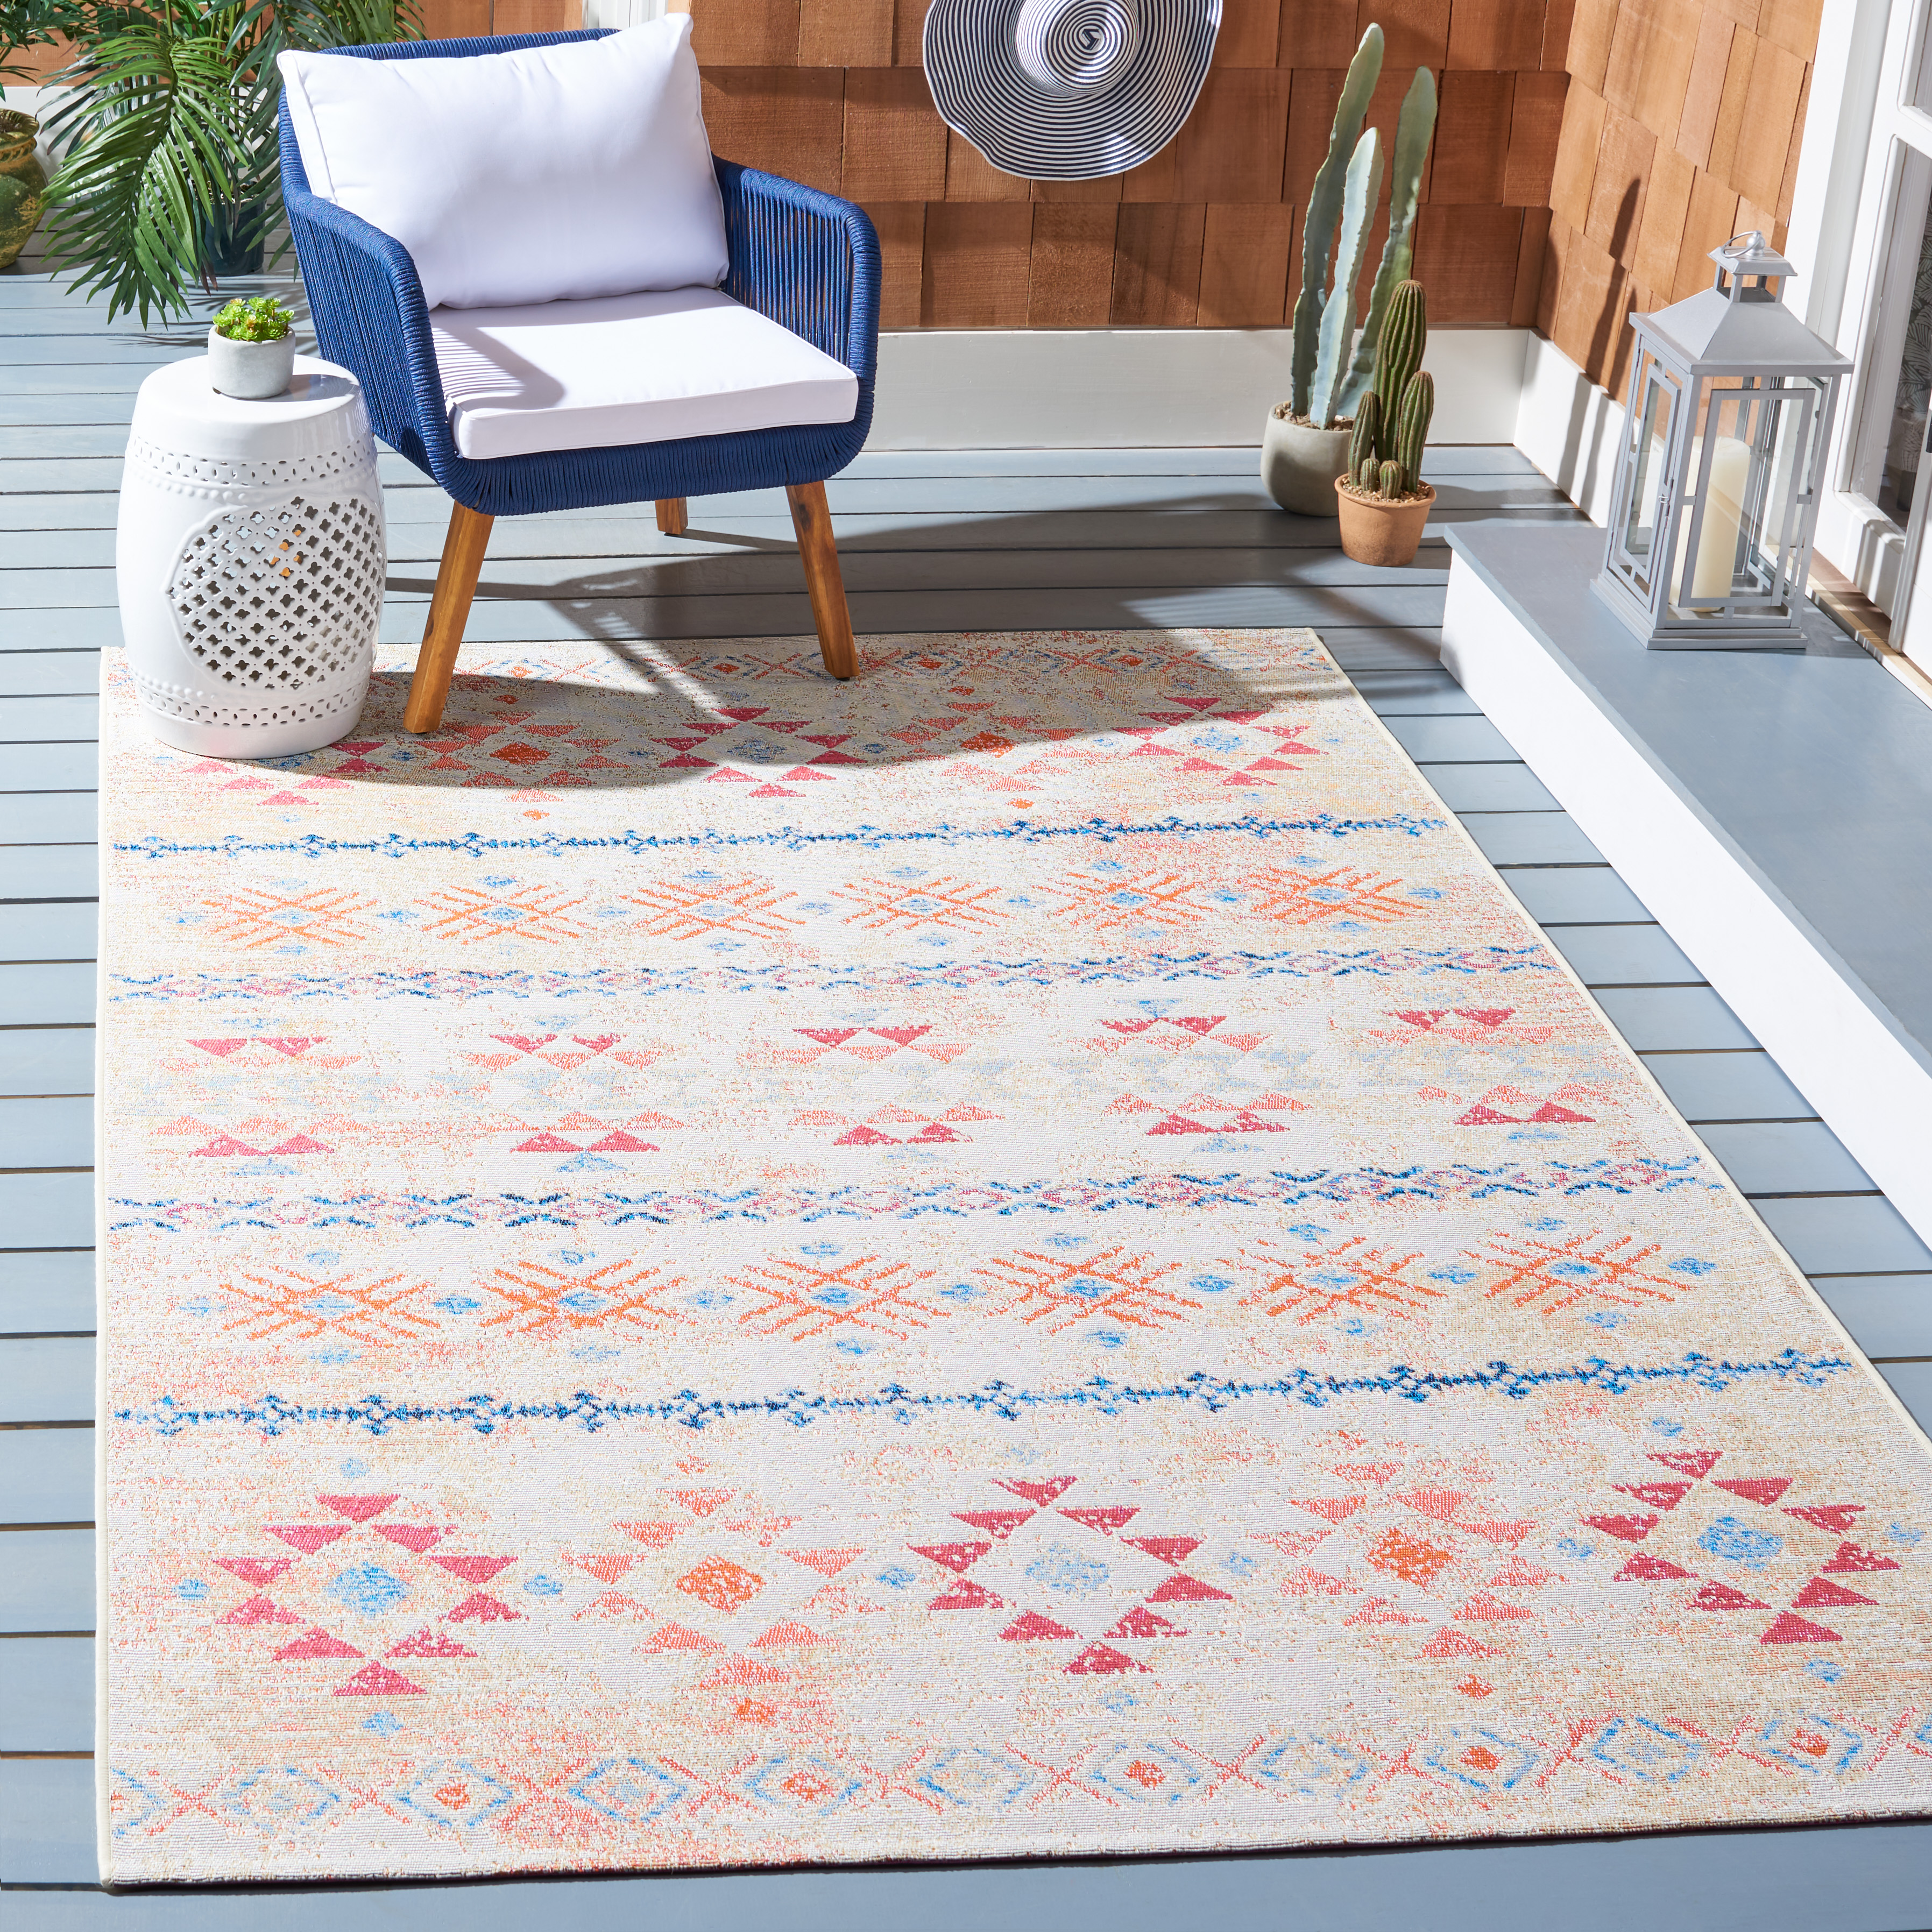 Safavieh Summer Donella Outdoor Boho Distressed Area Rug, Ivory/Red, 8' x 10'5" - image 1 of 6